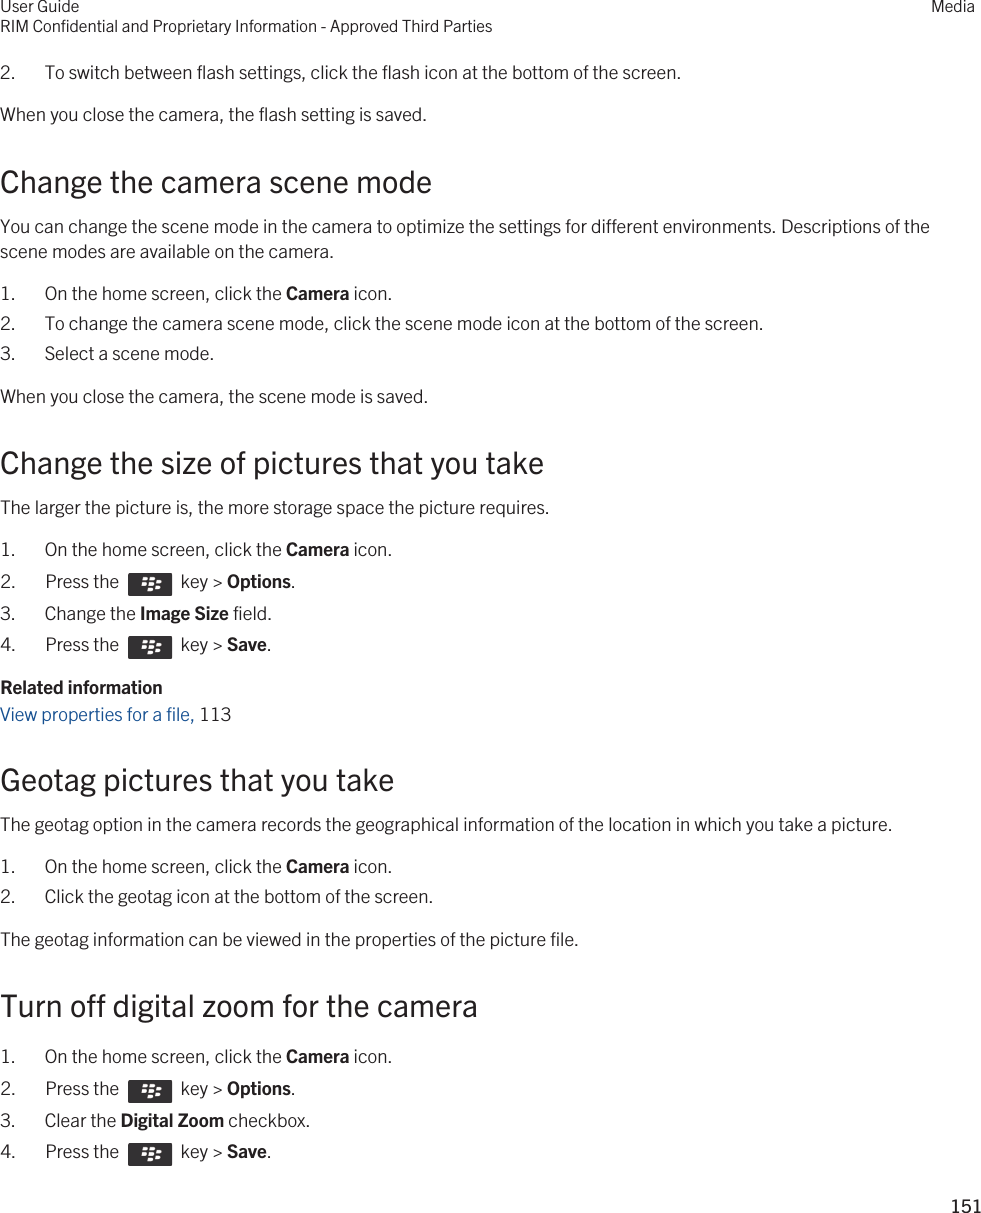 2. To switch between flash settings, click the flash icon at the bottom of the screen.When you close the camera, the flash setting is saved.Change the camera scene modeYou can change the scene mode in the camera to optimize the settings for different environments. Descriptions of the scene modes are available on the camera.1. On the home screen, click the Camera icon.2. To change the camera scene mode, click the scene mode icon at the bottom of the screen.3. Select a scene mode.When you close the camera, the scene mode is saved.Change the size of pictures that you takeThe larger the picture is, the more storage space the picture requires.1. On the home screen, click the Camera icon.2.  Press the    key &gt; Options. 3. Change the Image Size field.4.  Press the    key &gt; Save. Related informationView properties for a file, 113 Geotag pictures that you takeThe geotag option in the camera records the geographical information of the location in which you take a picture.1. On the home screen, click the Camera icon.2. Click the geotag icon at the bottom of the screen.The geotag information can be viewed in the properties of the picture file.Turn off digital zoom for the camera1. On the home screen, click the Camera icon.2.  Press the    key &gt; Options. 3. Clear the Digital Zoom checkbox.4.  Press the    key &gt; Save. User GuideRIM Confidential and Proprietary Information - Approved Third PartiesMedia151 